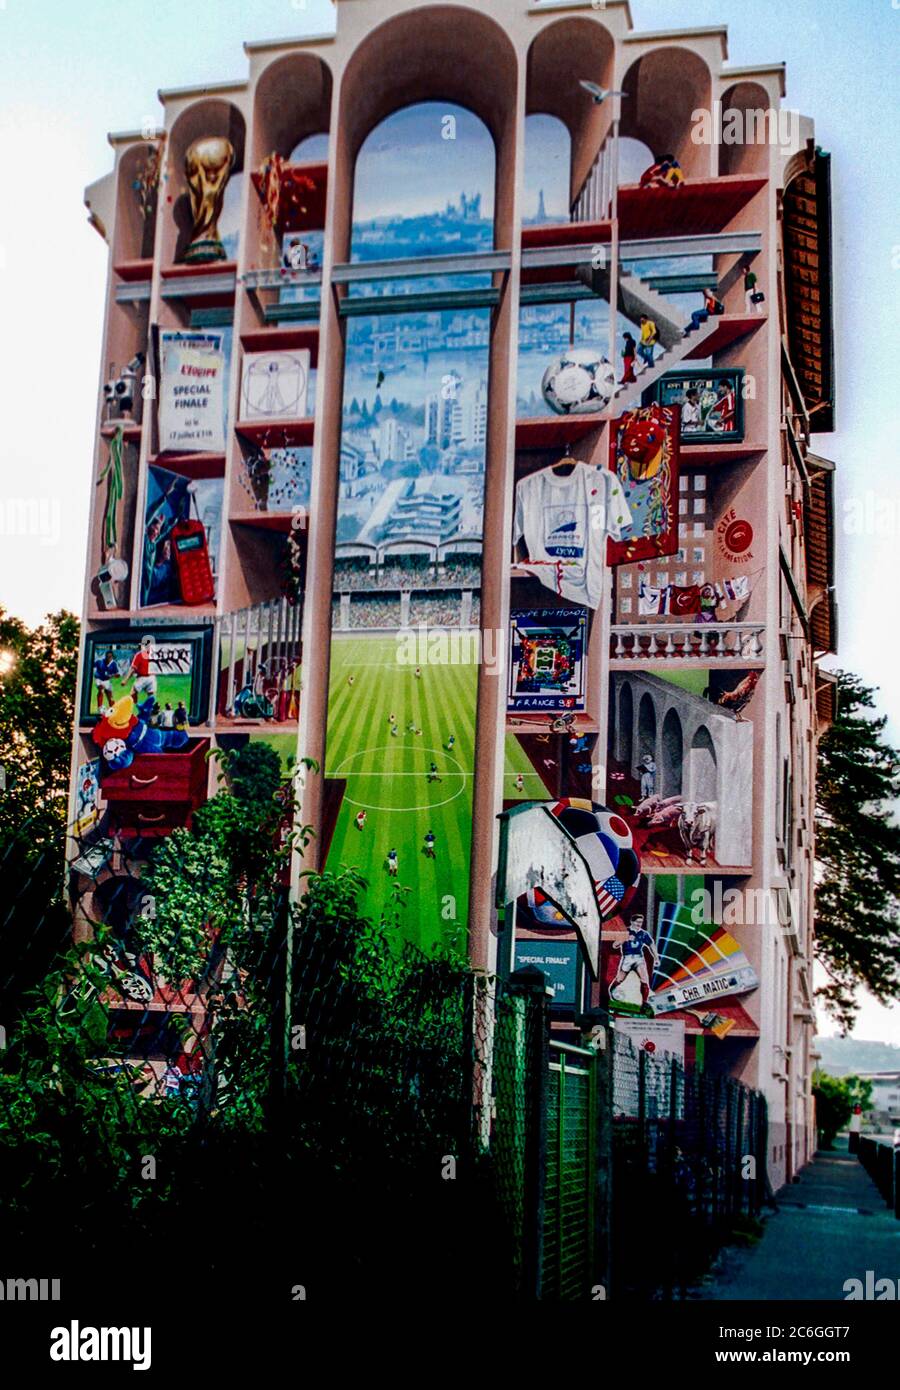 Soccer wall in Lyon, France during the 1998 World Cup. Stock Photo